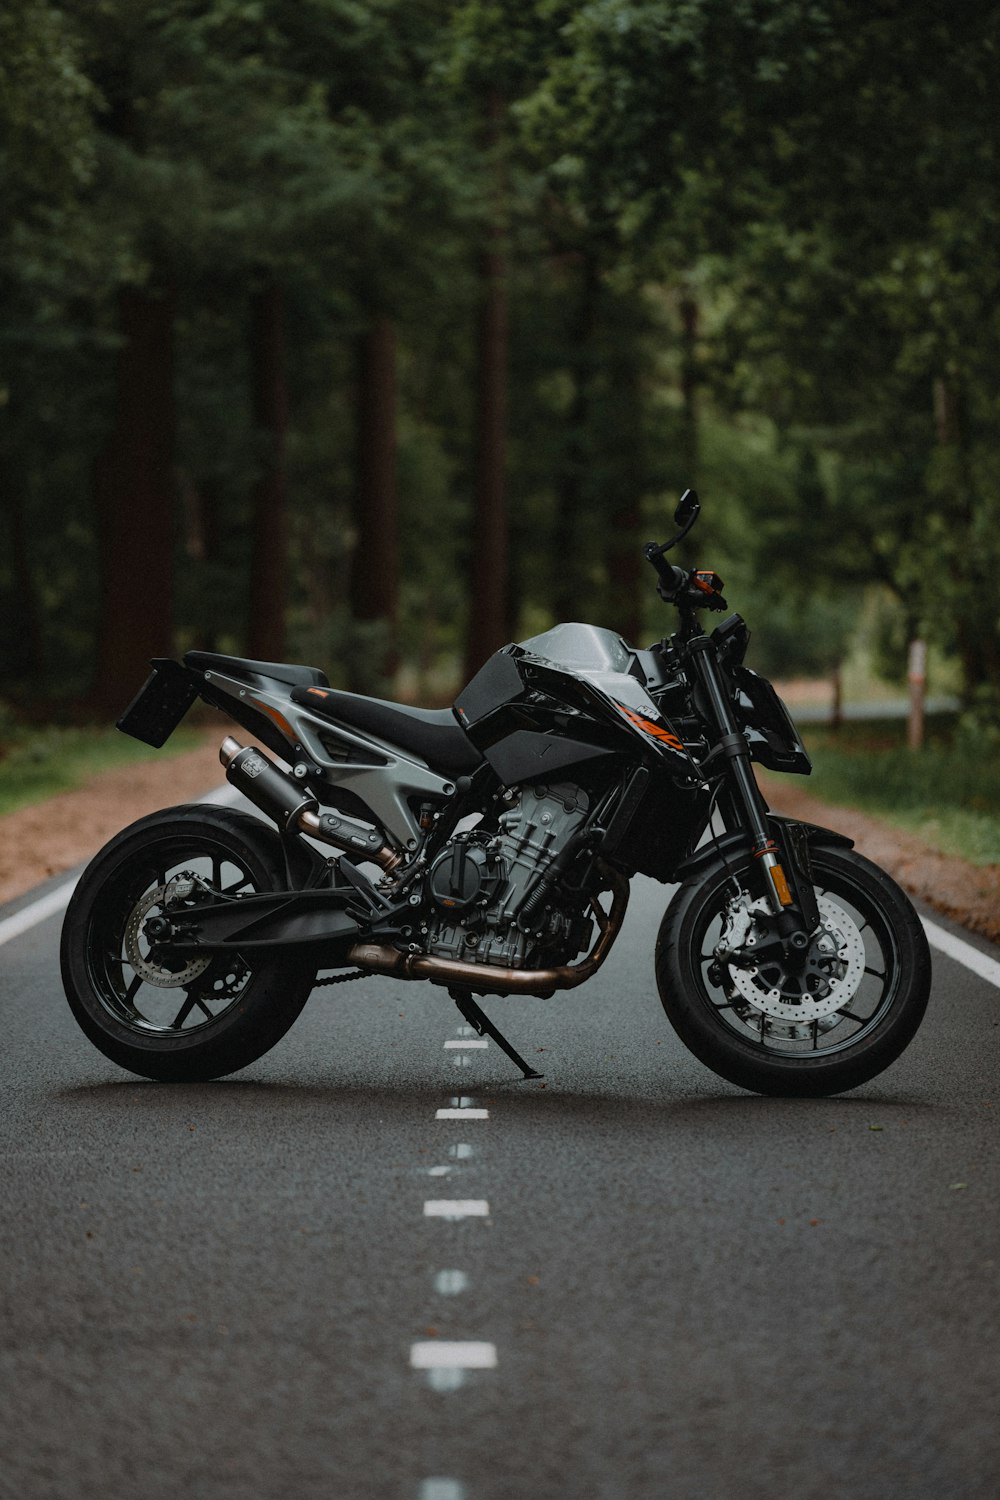 20+ Best Free Motorcycle Pictures on Unsplash